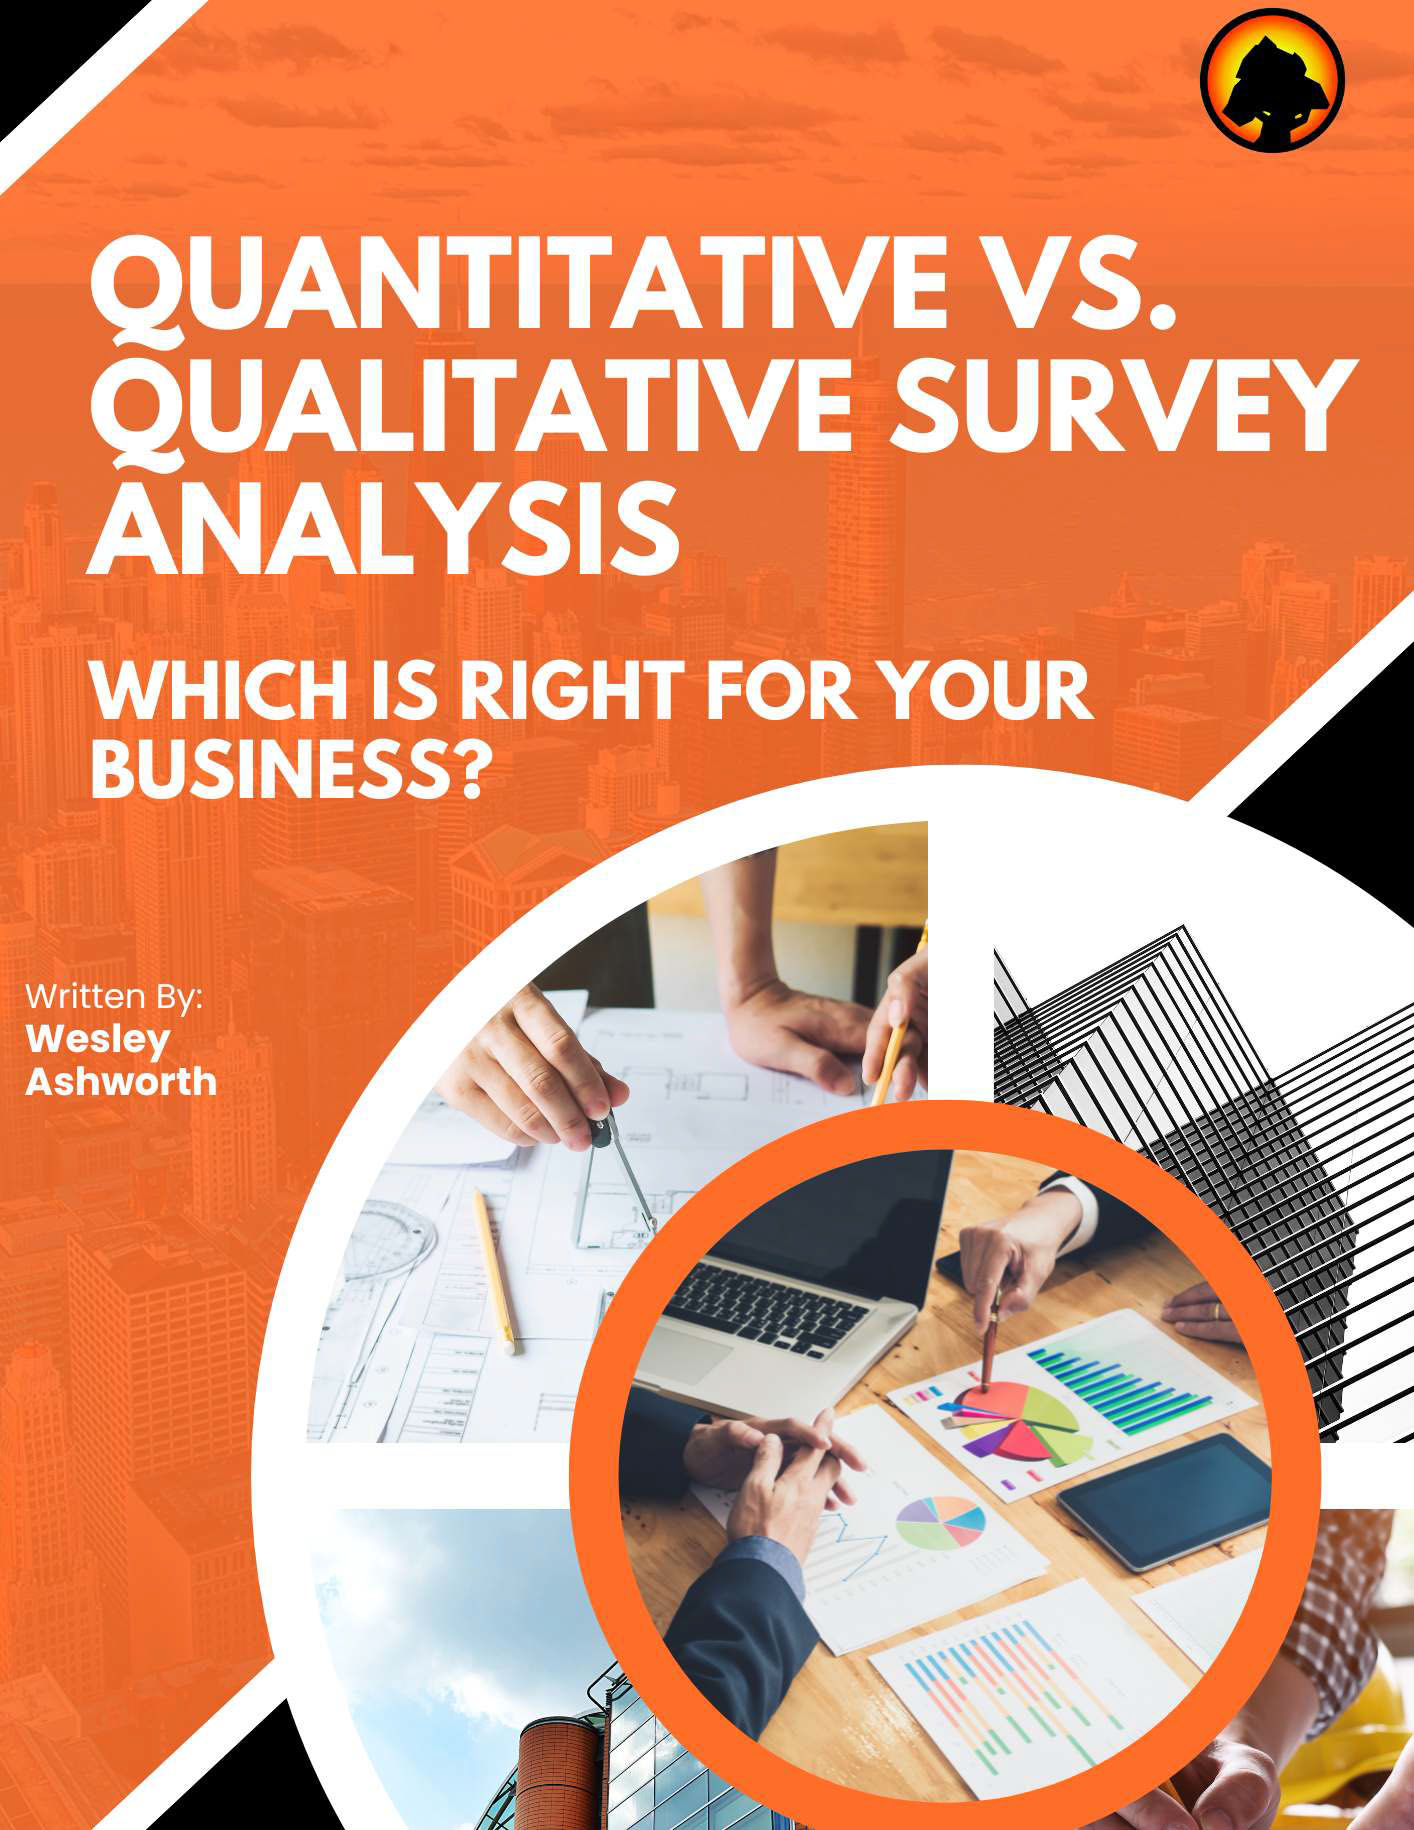 Quantitative vs. Qualitative Survey Analysis: Which is Right for Your Business?